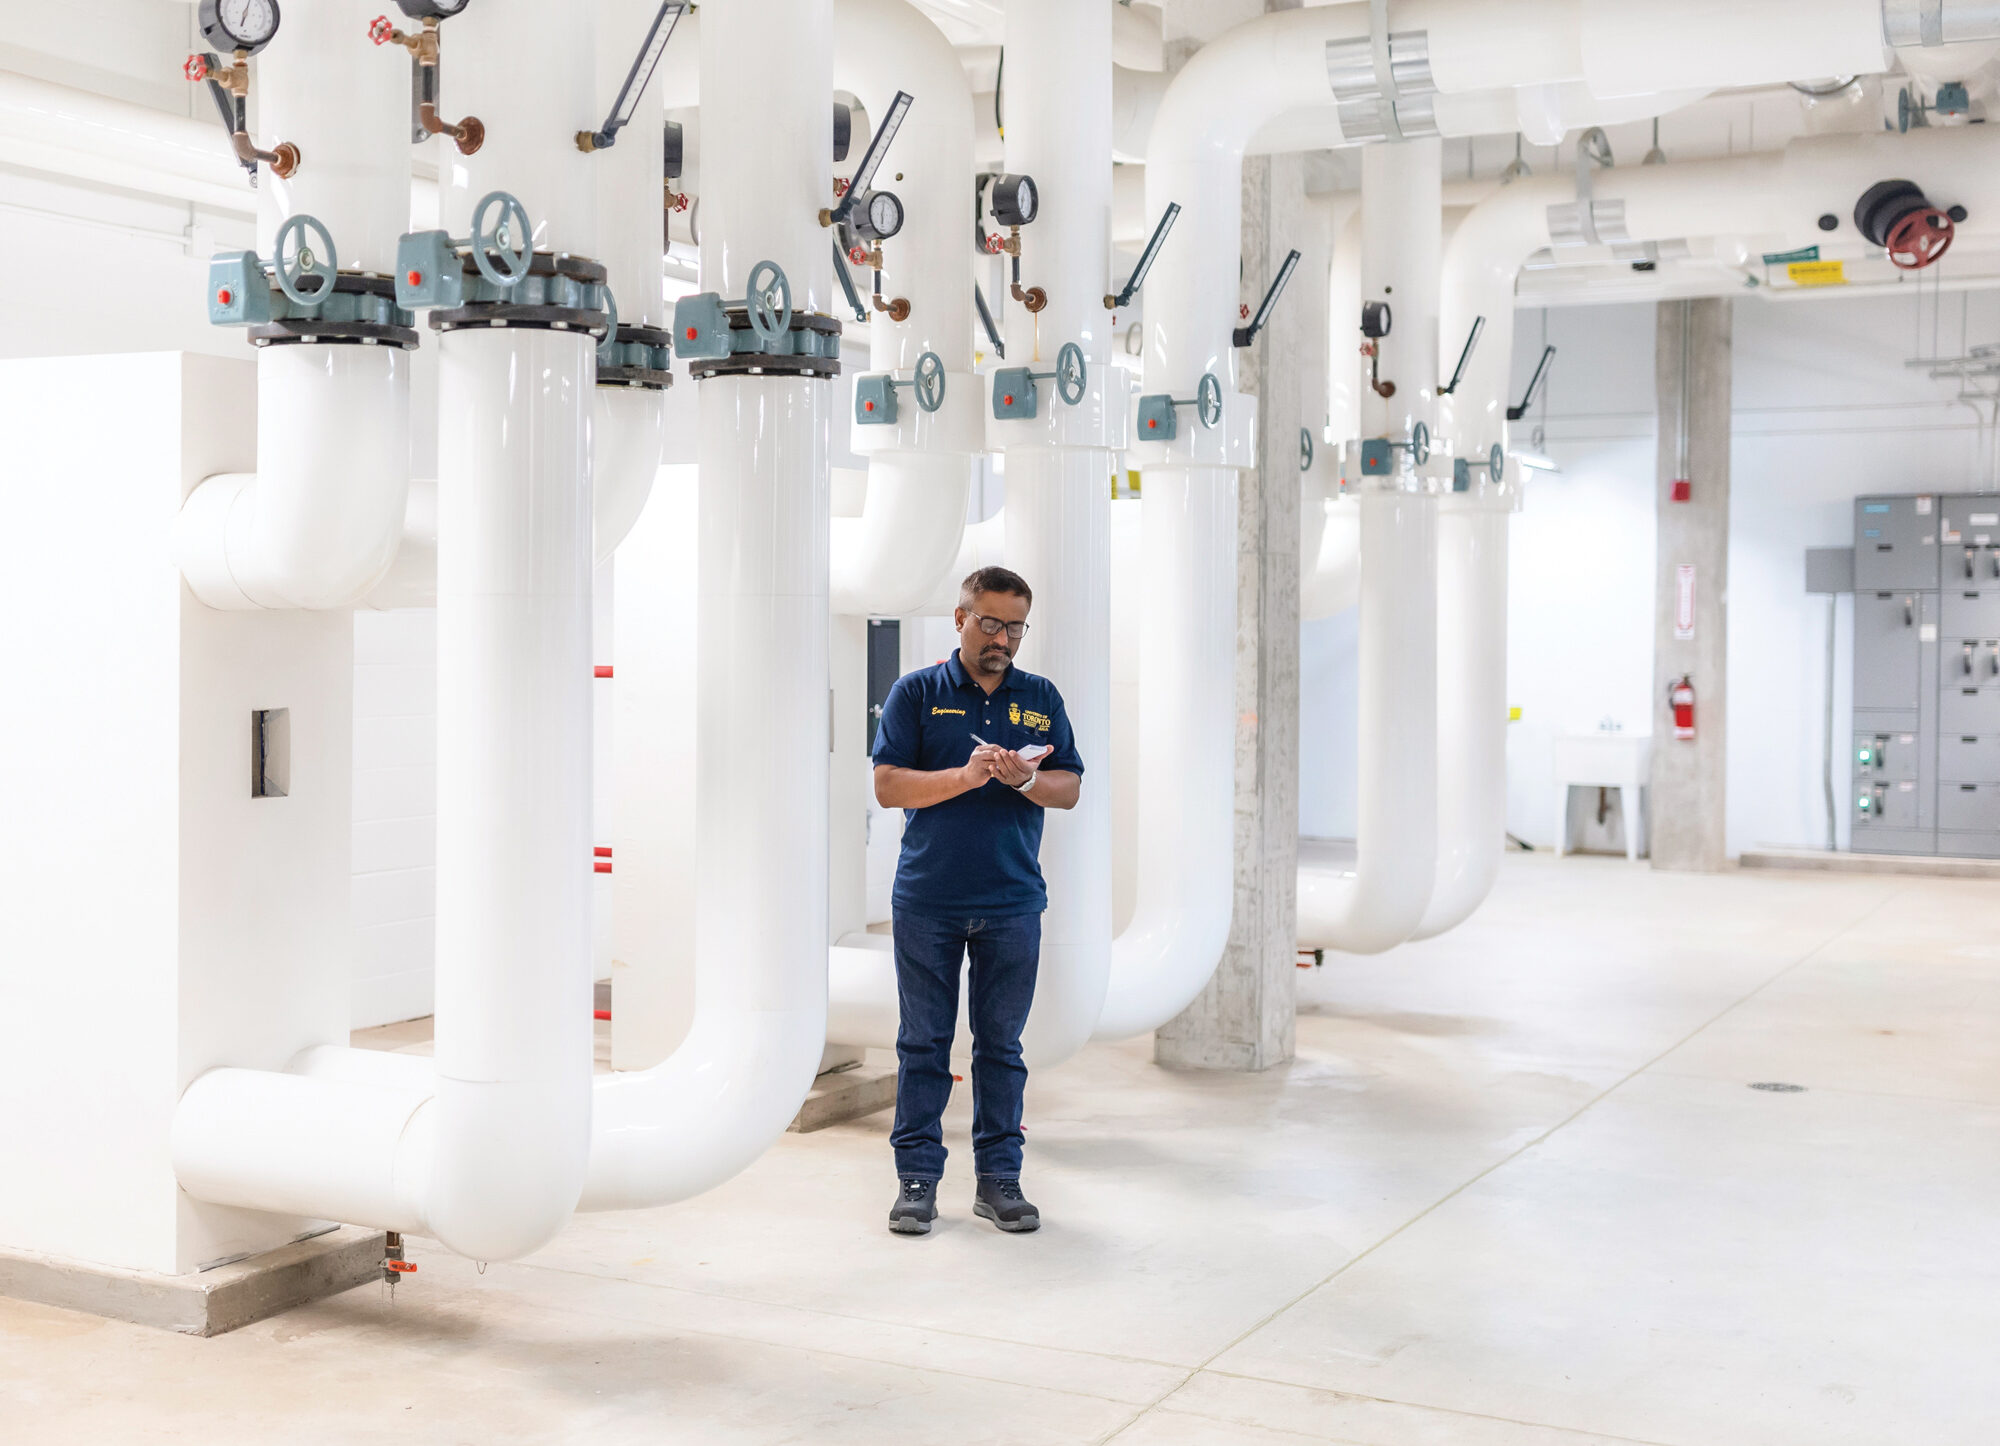 Building engineer Gurtaj Bajwa is writing on a small notepad in a room with large white pipes running parallel to the walls and ceilings, housing the geothermal system at U of T Scarborough's Instruction Centre